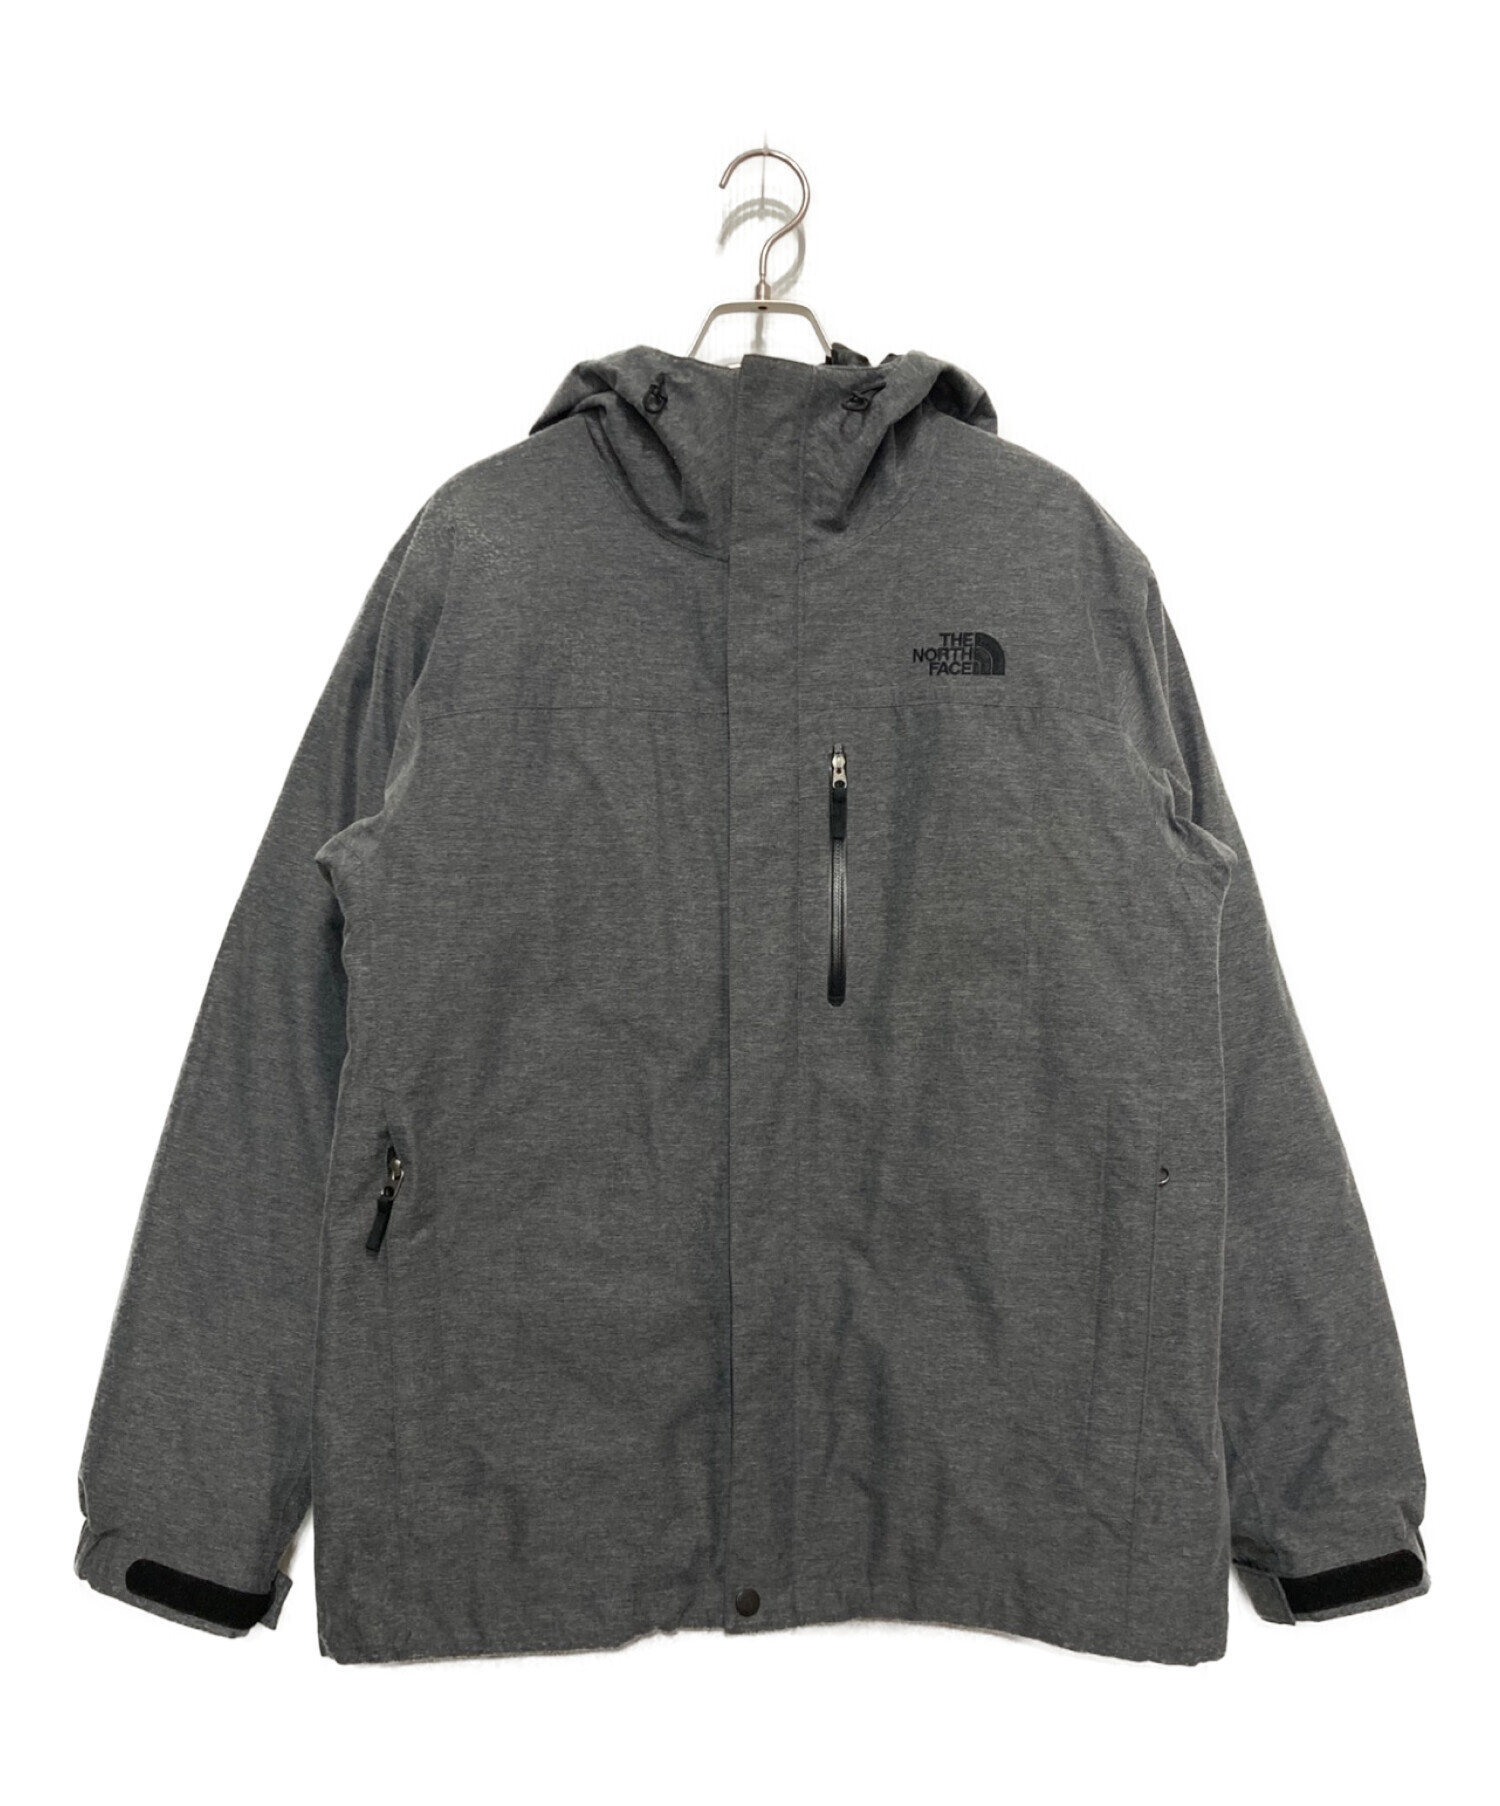 THENORTHFACETHE NORTH FACE Zeus Triclimate Jacket